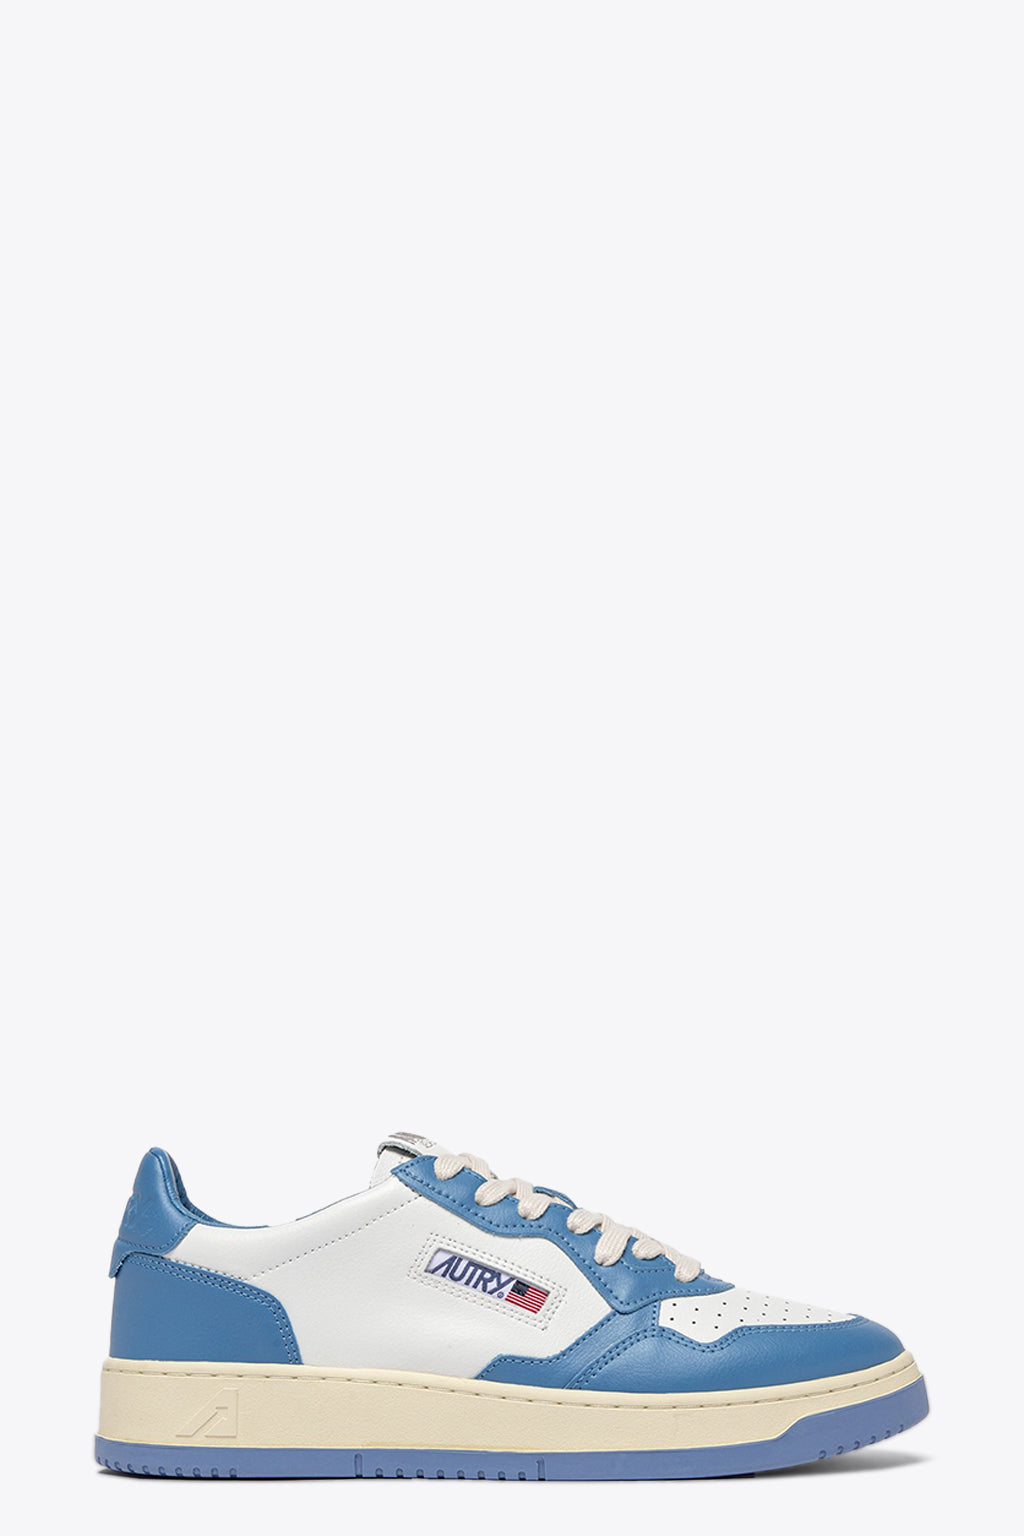 alt-image__Sky-blue-and-white-leather-low-sneaker---Medalist